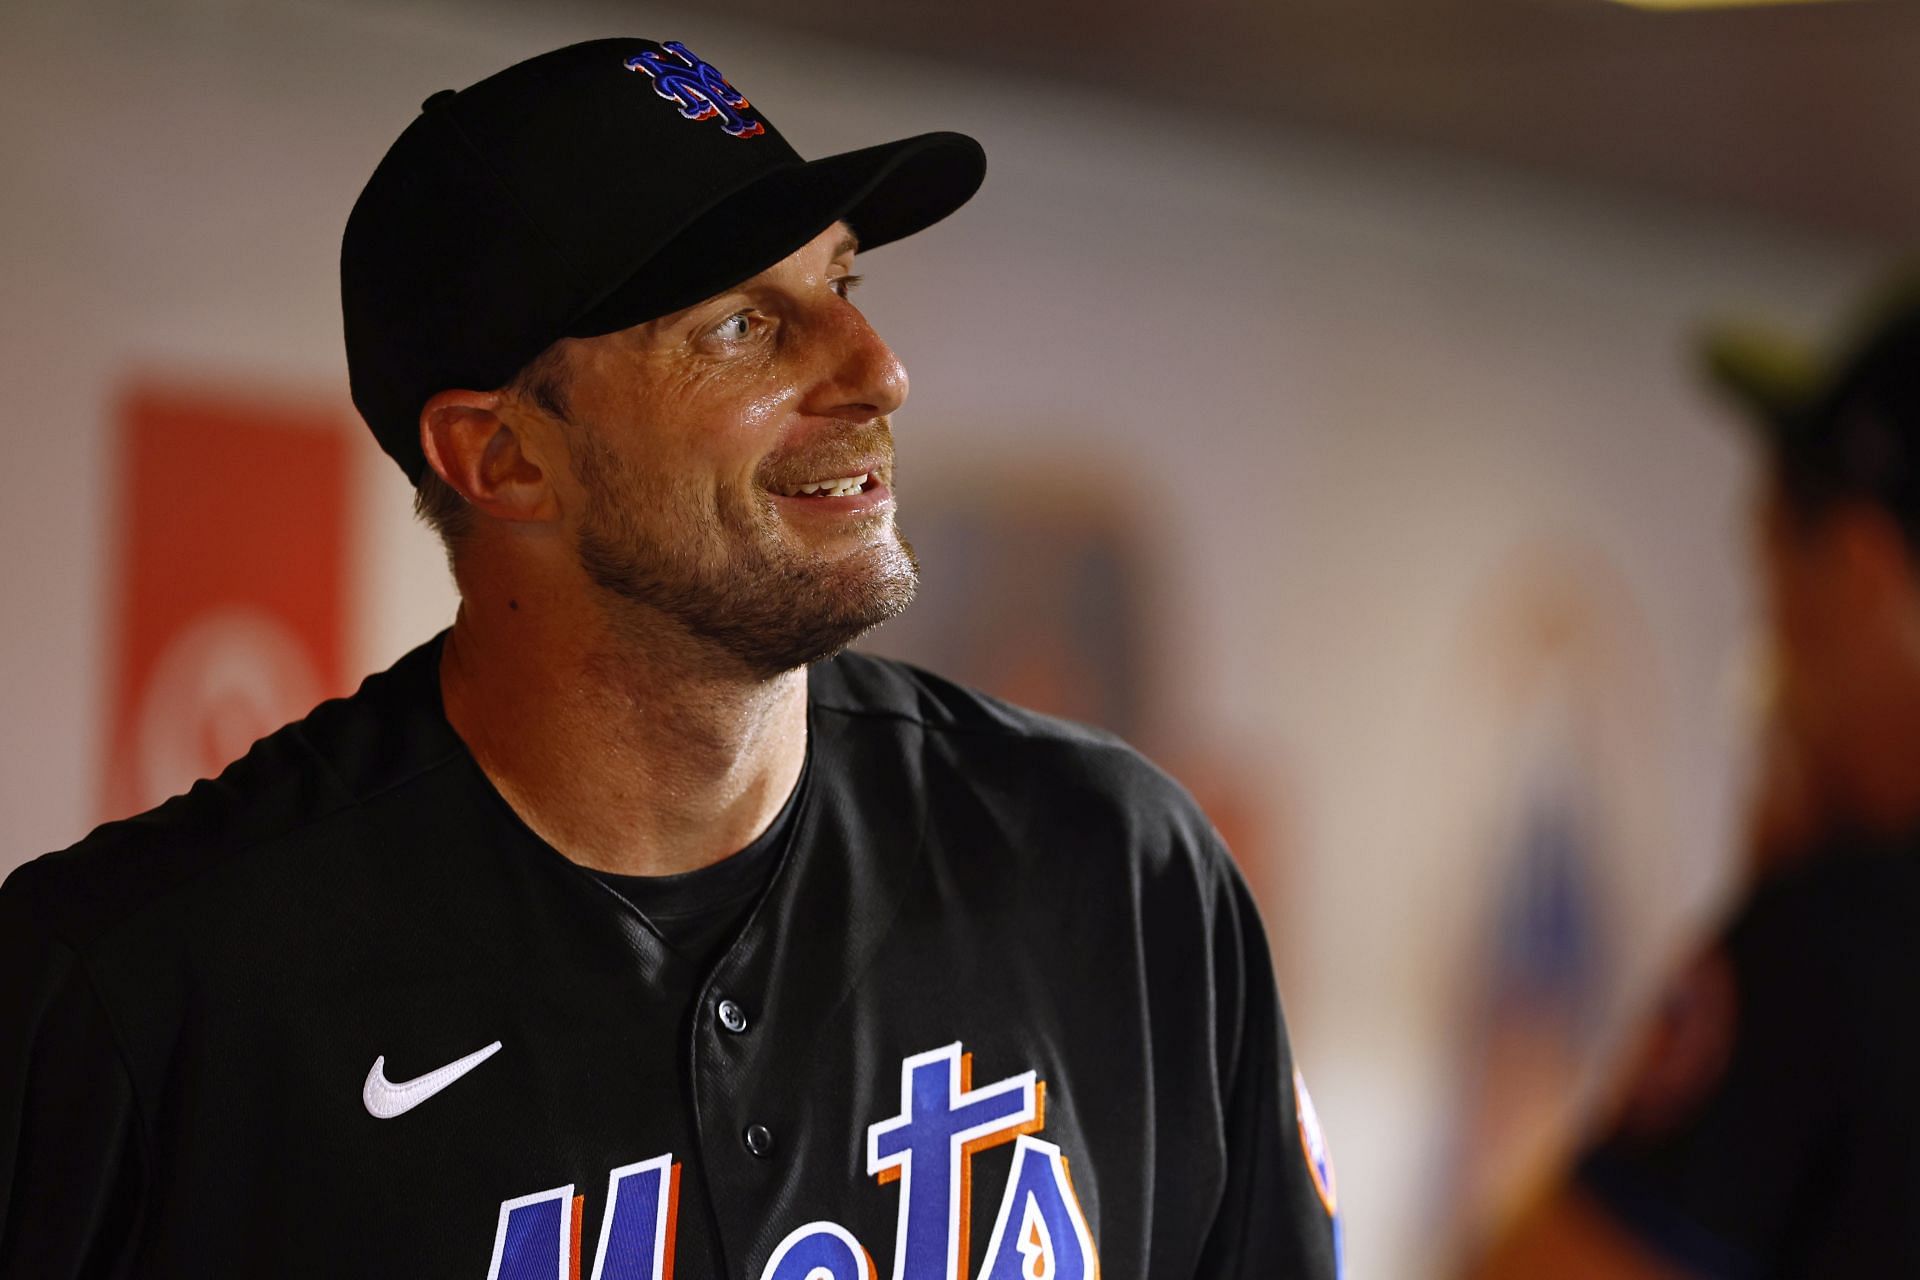 Pitcher Max Scherzer of the New York Mets smiles in the dugout against the Washington Nationals at Citi Field